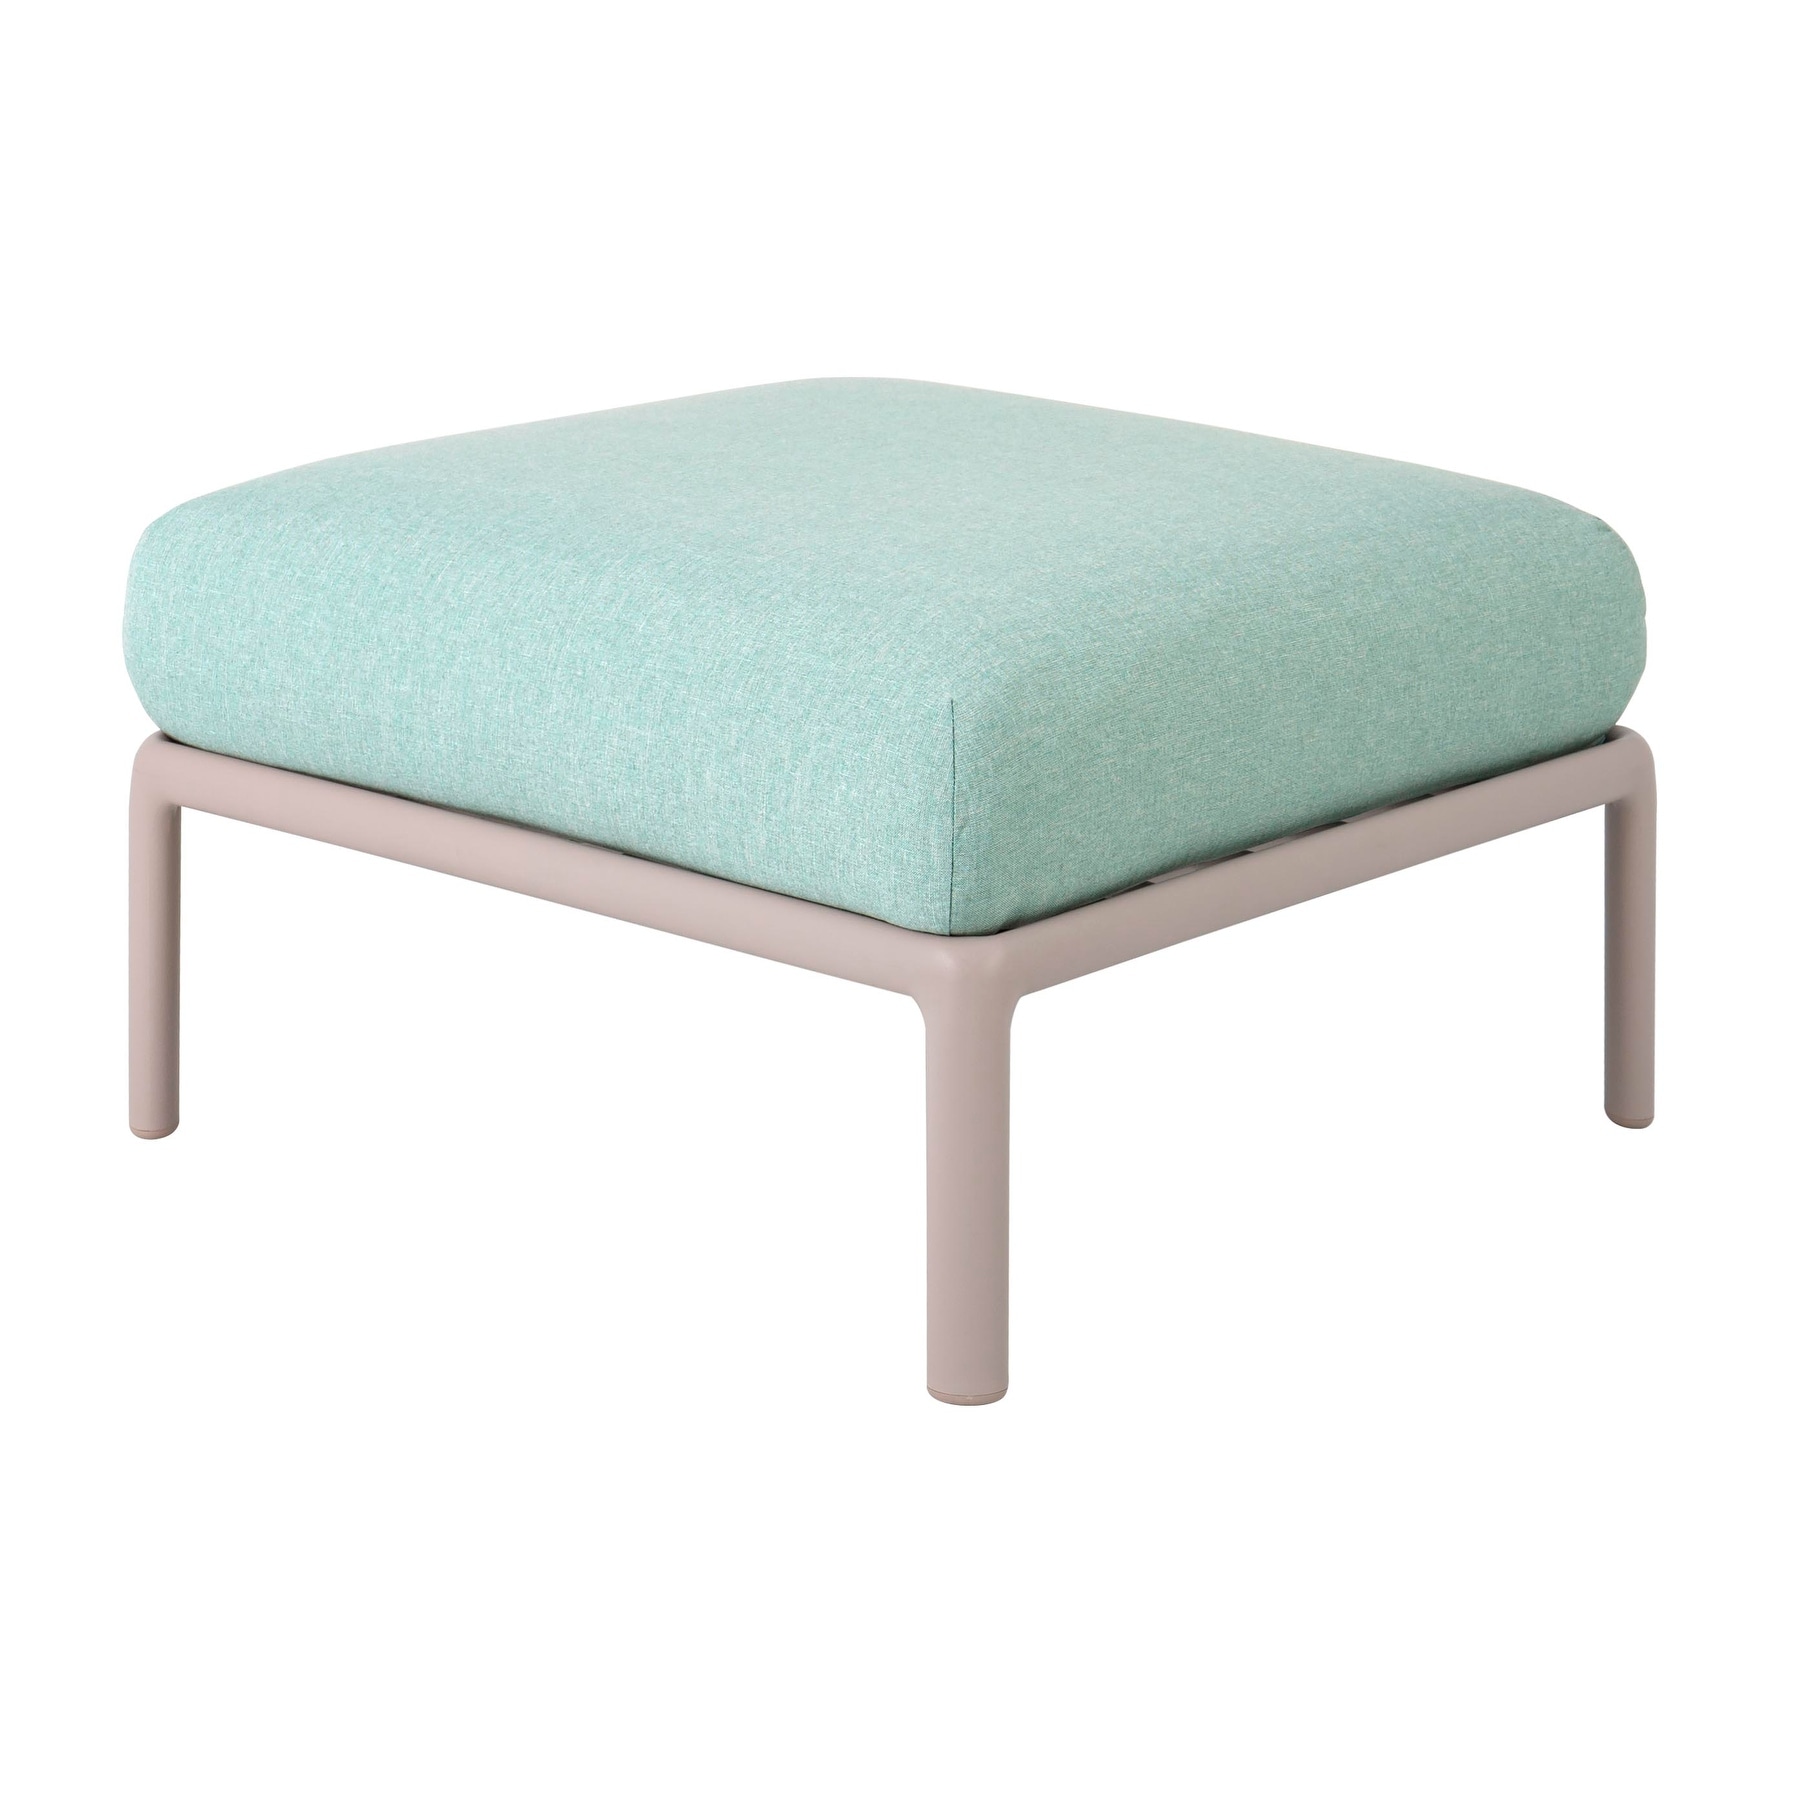 Laurel Resin All Weather Ottoman With Cushion